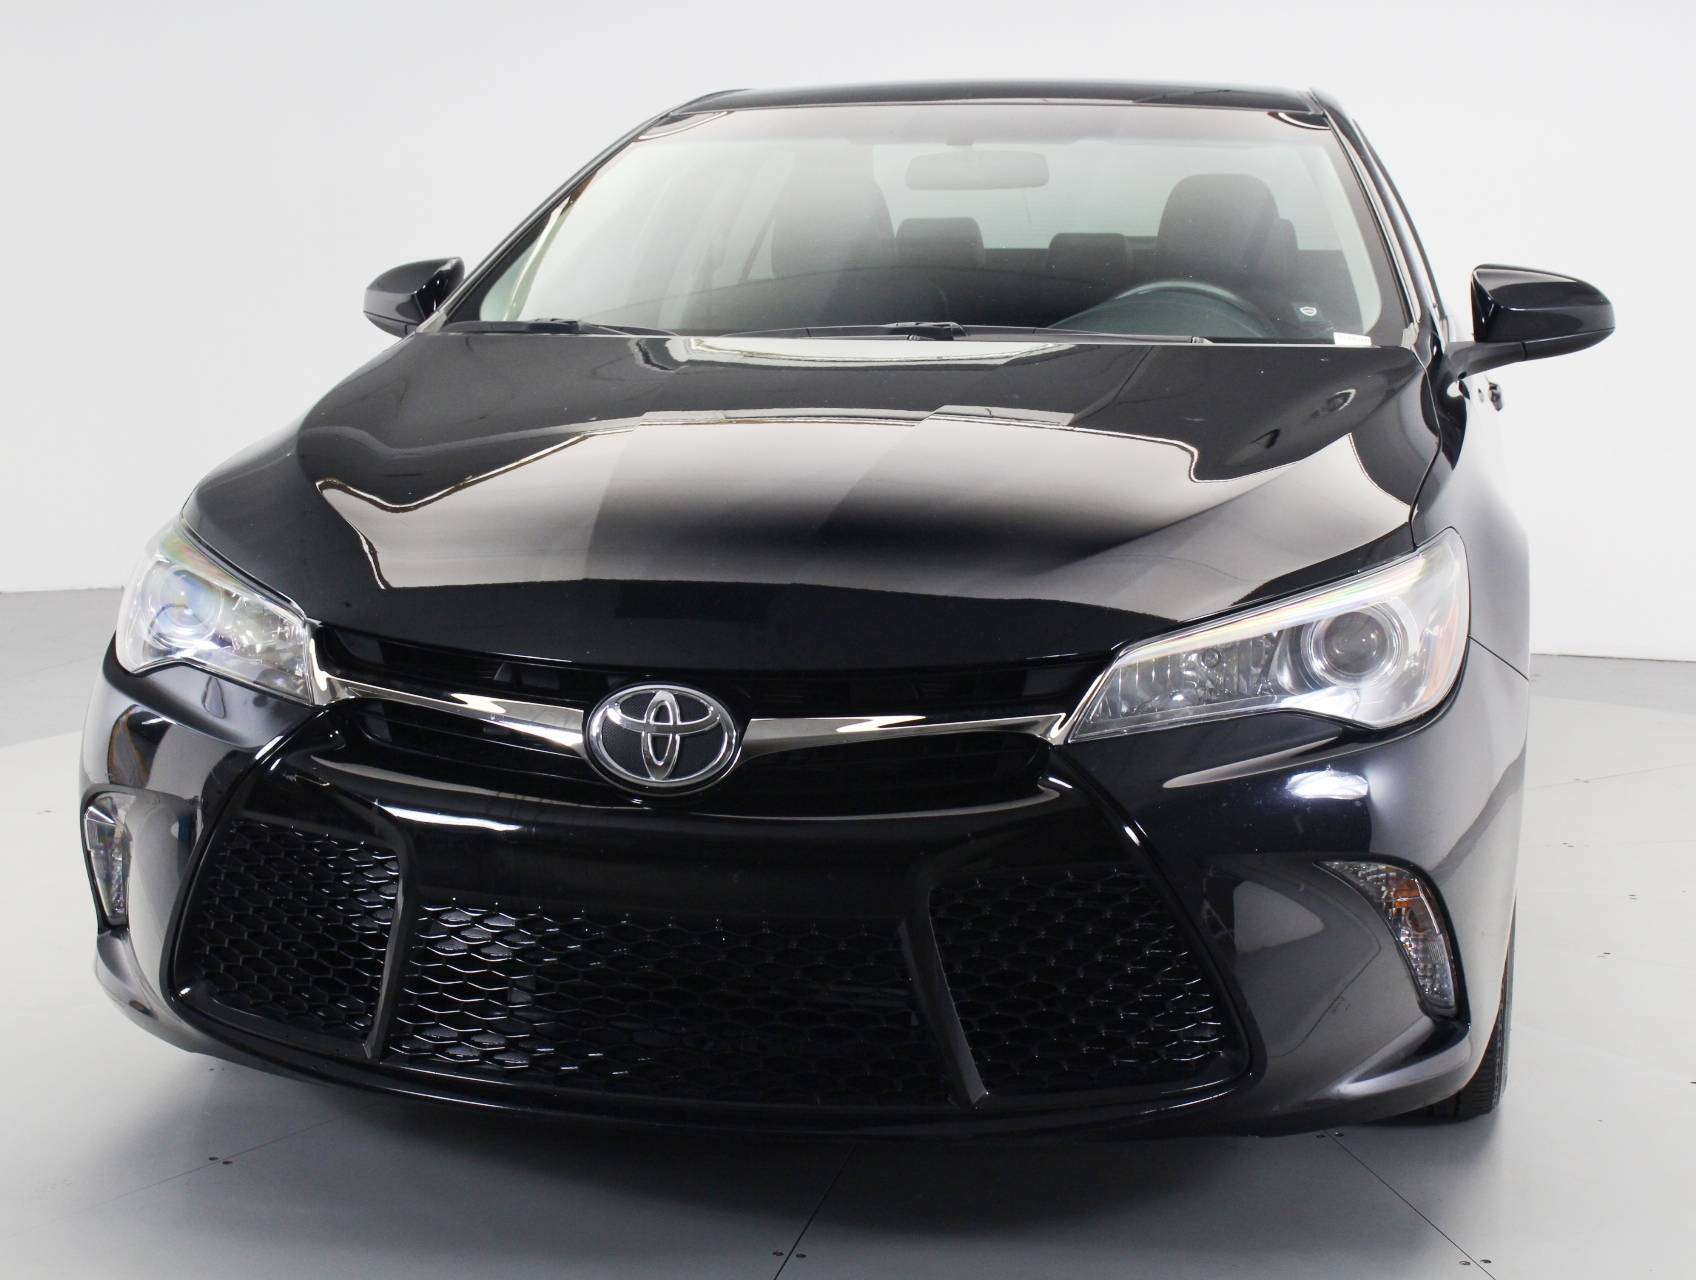 Florida Fine Cars - Used TOYOTA CAMRY 2017 WEST PALM Se